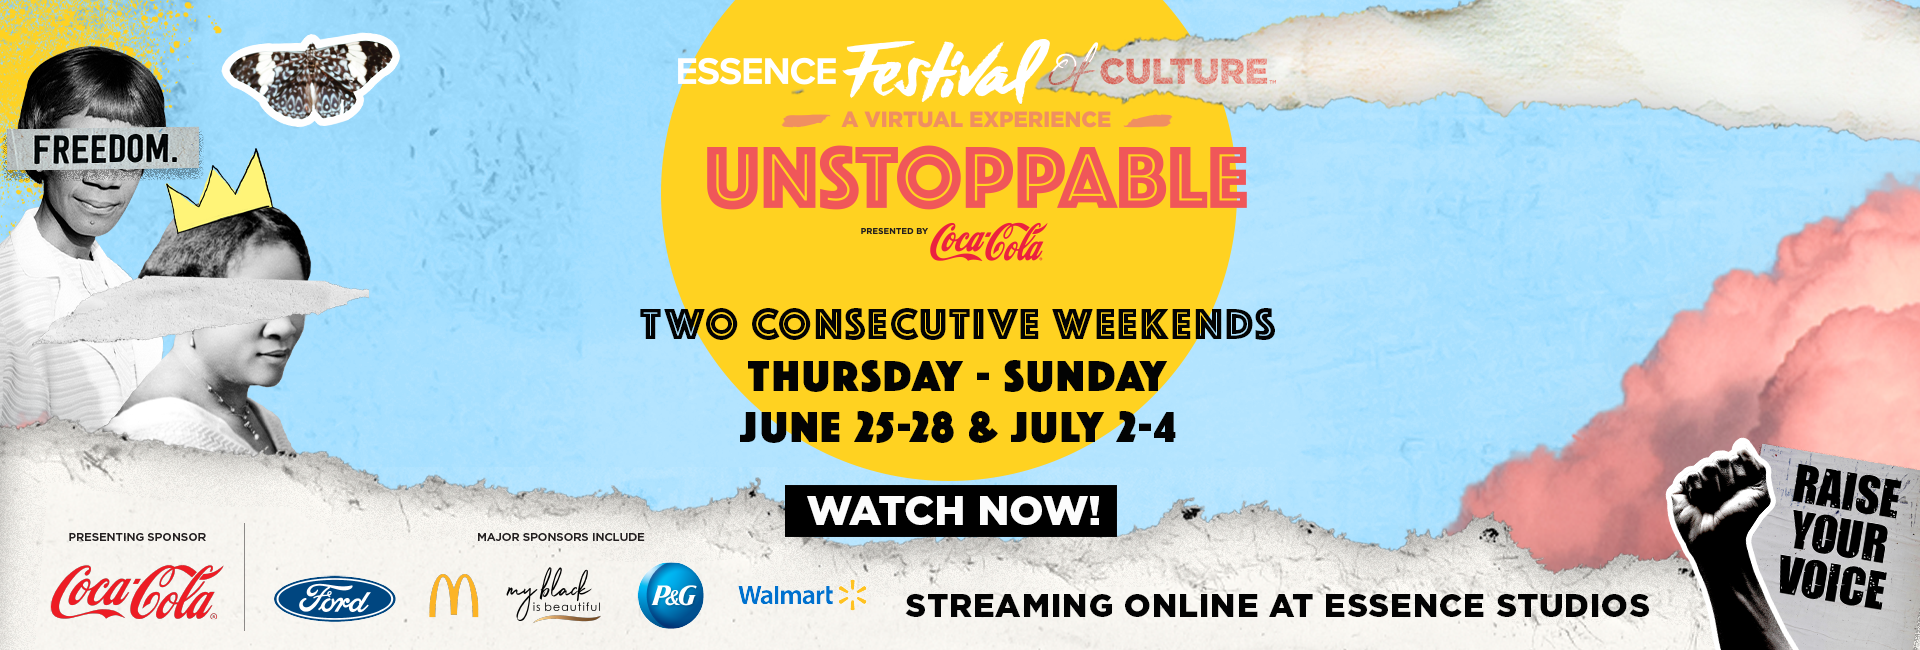 The ESSENCE Festival Of Culture Is Going Virtual!